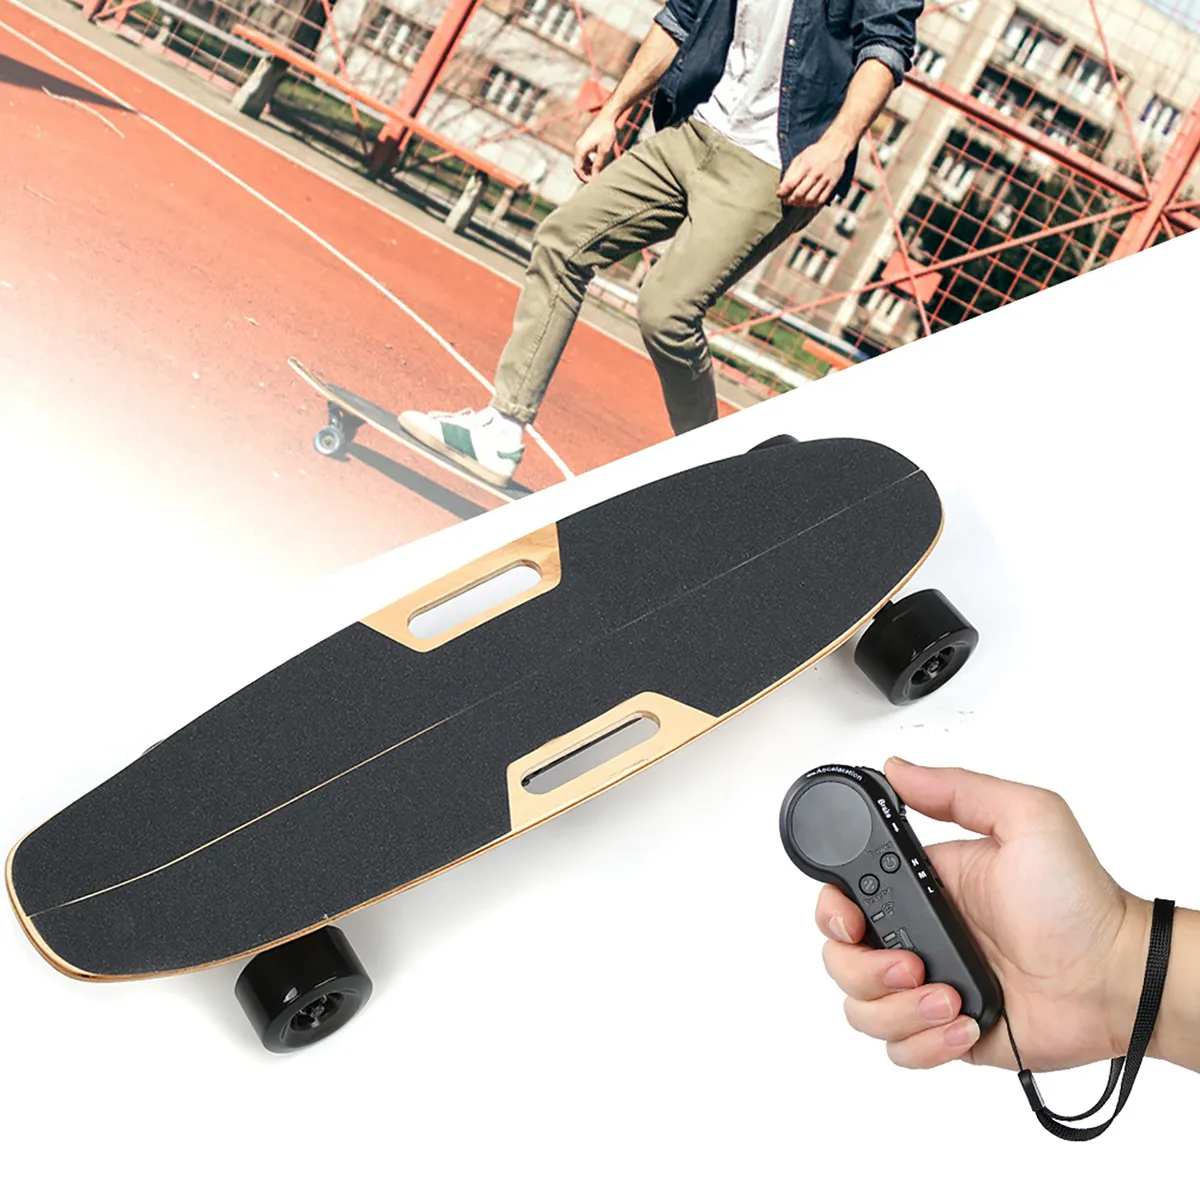 What Is The Frequency Of The Emad Electric Skateboard Controler